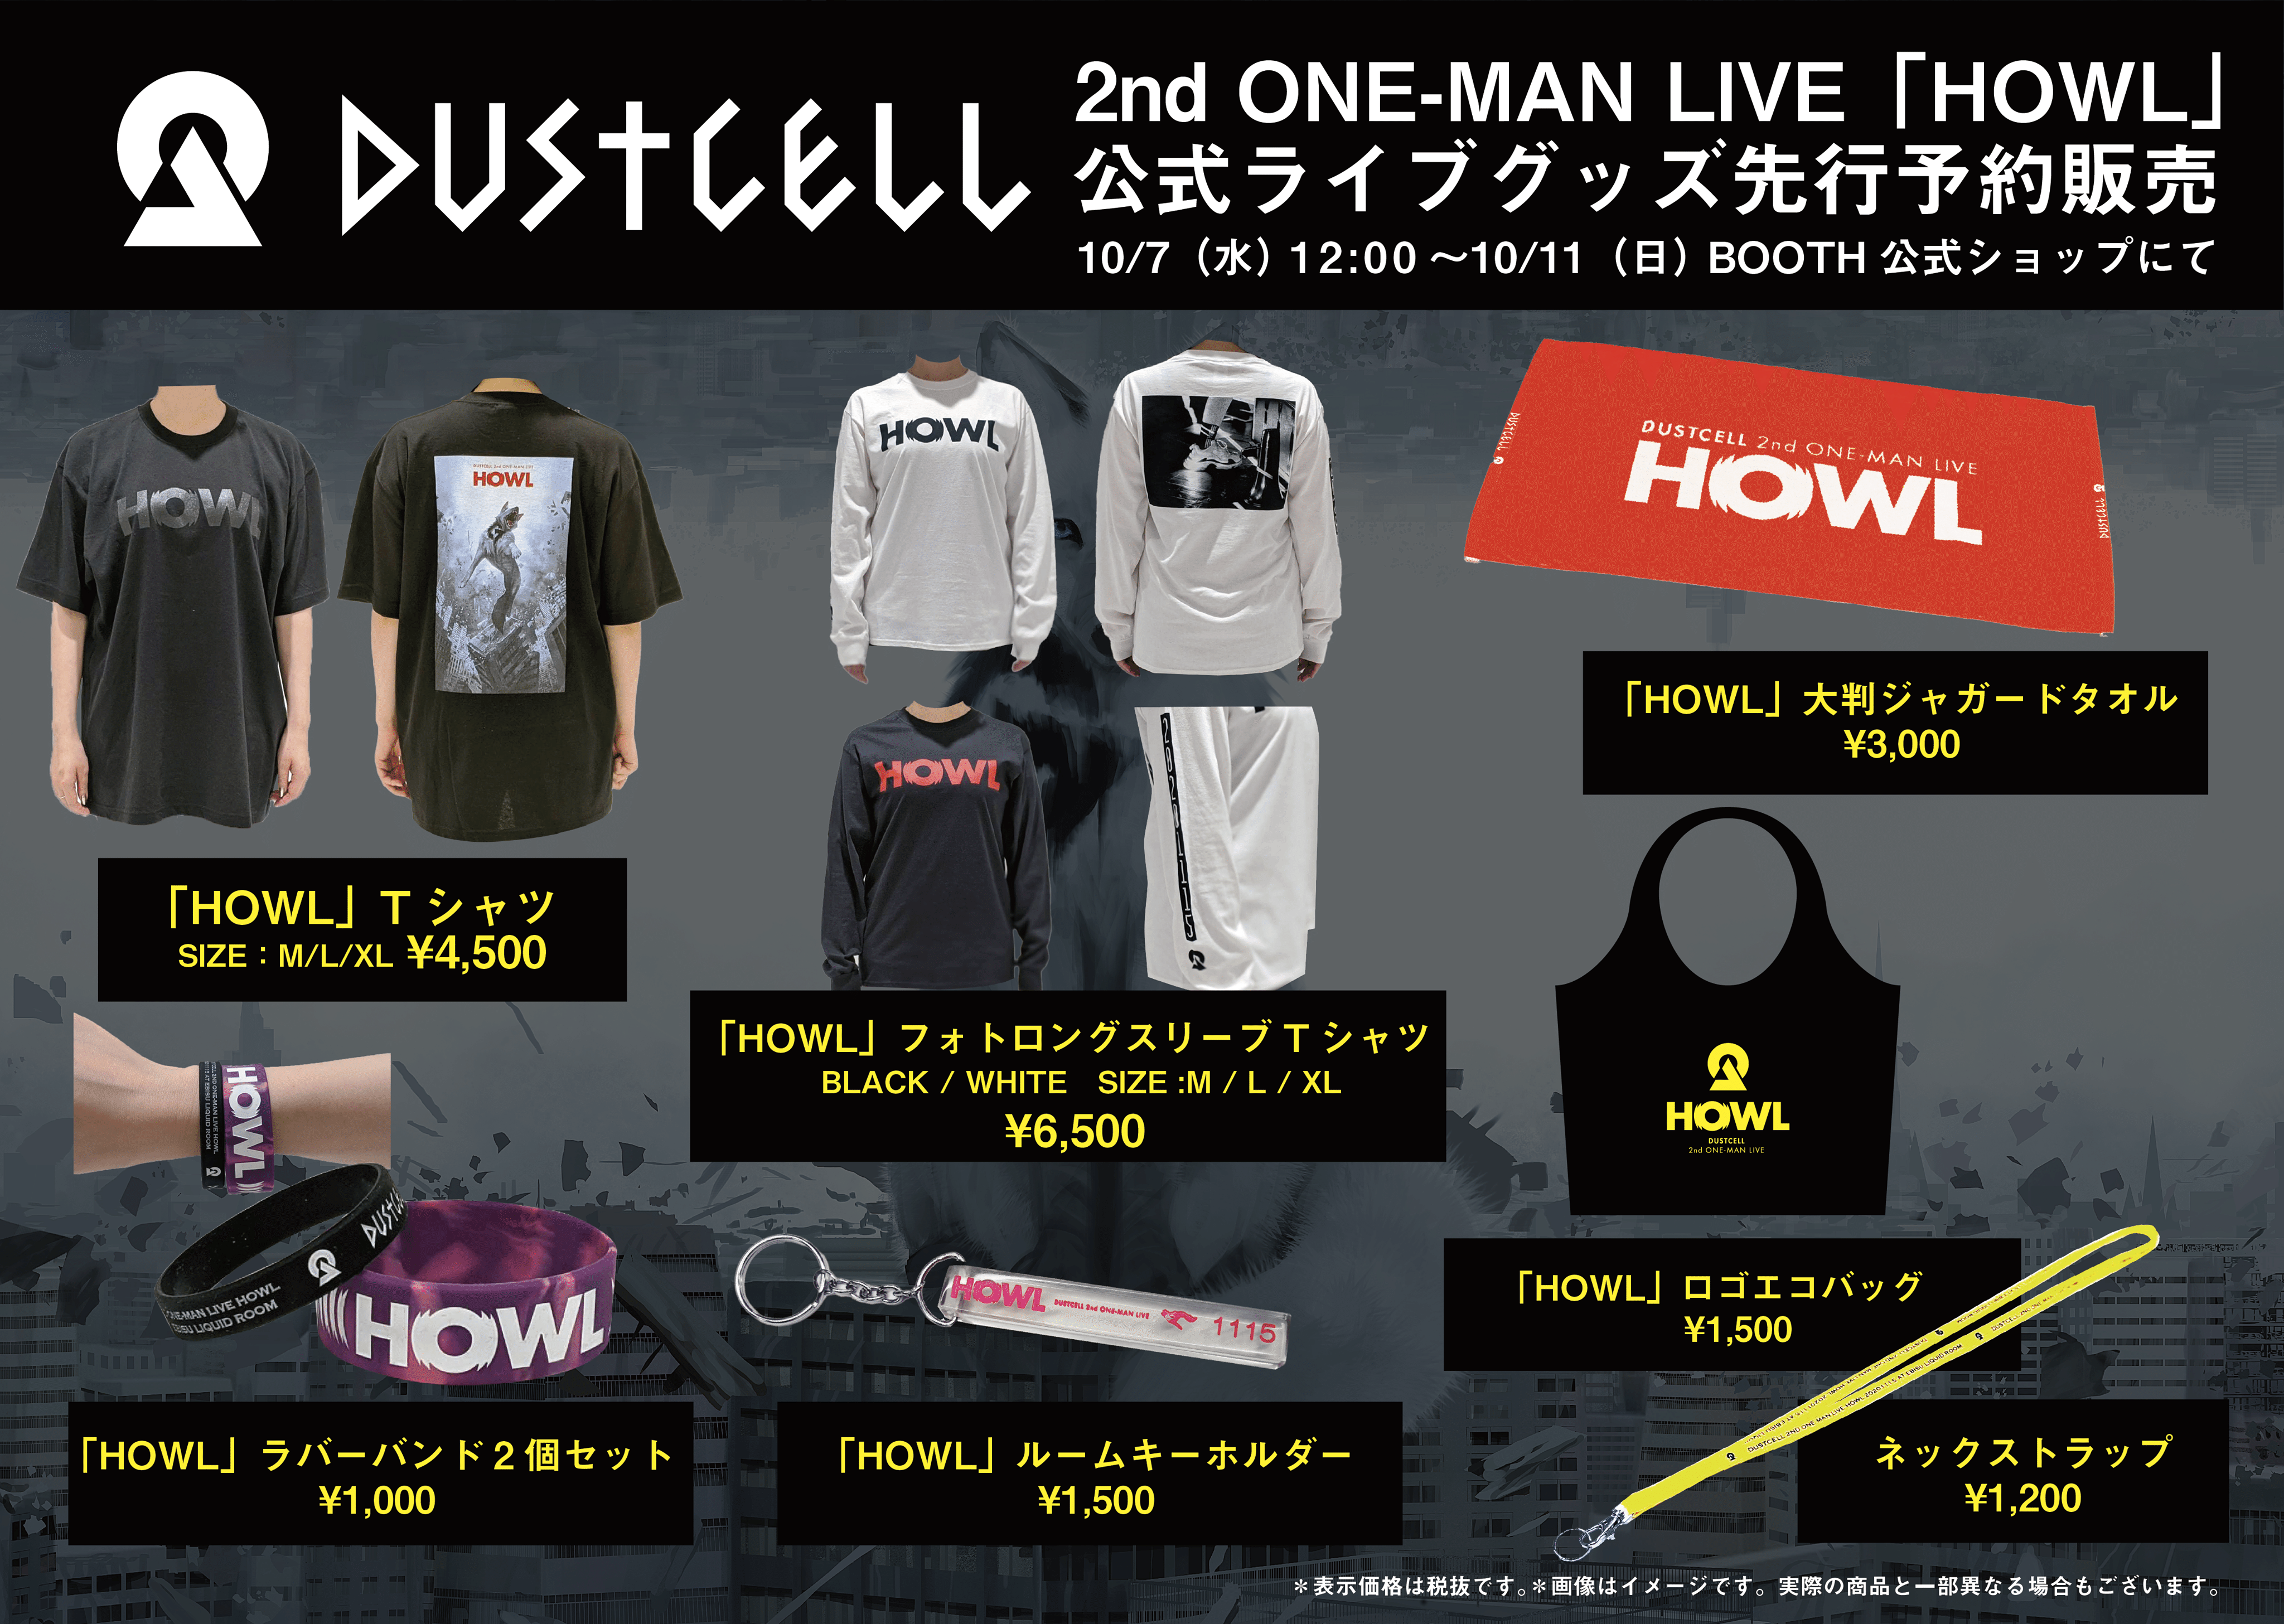 DUSTCELL】2nd ONE-MAN LIVE 「HOWL」ライブグッズ10/7（水）12:00より